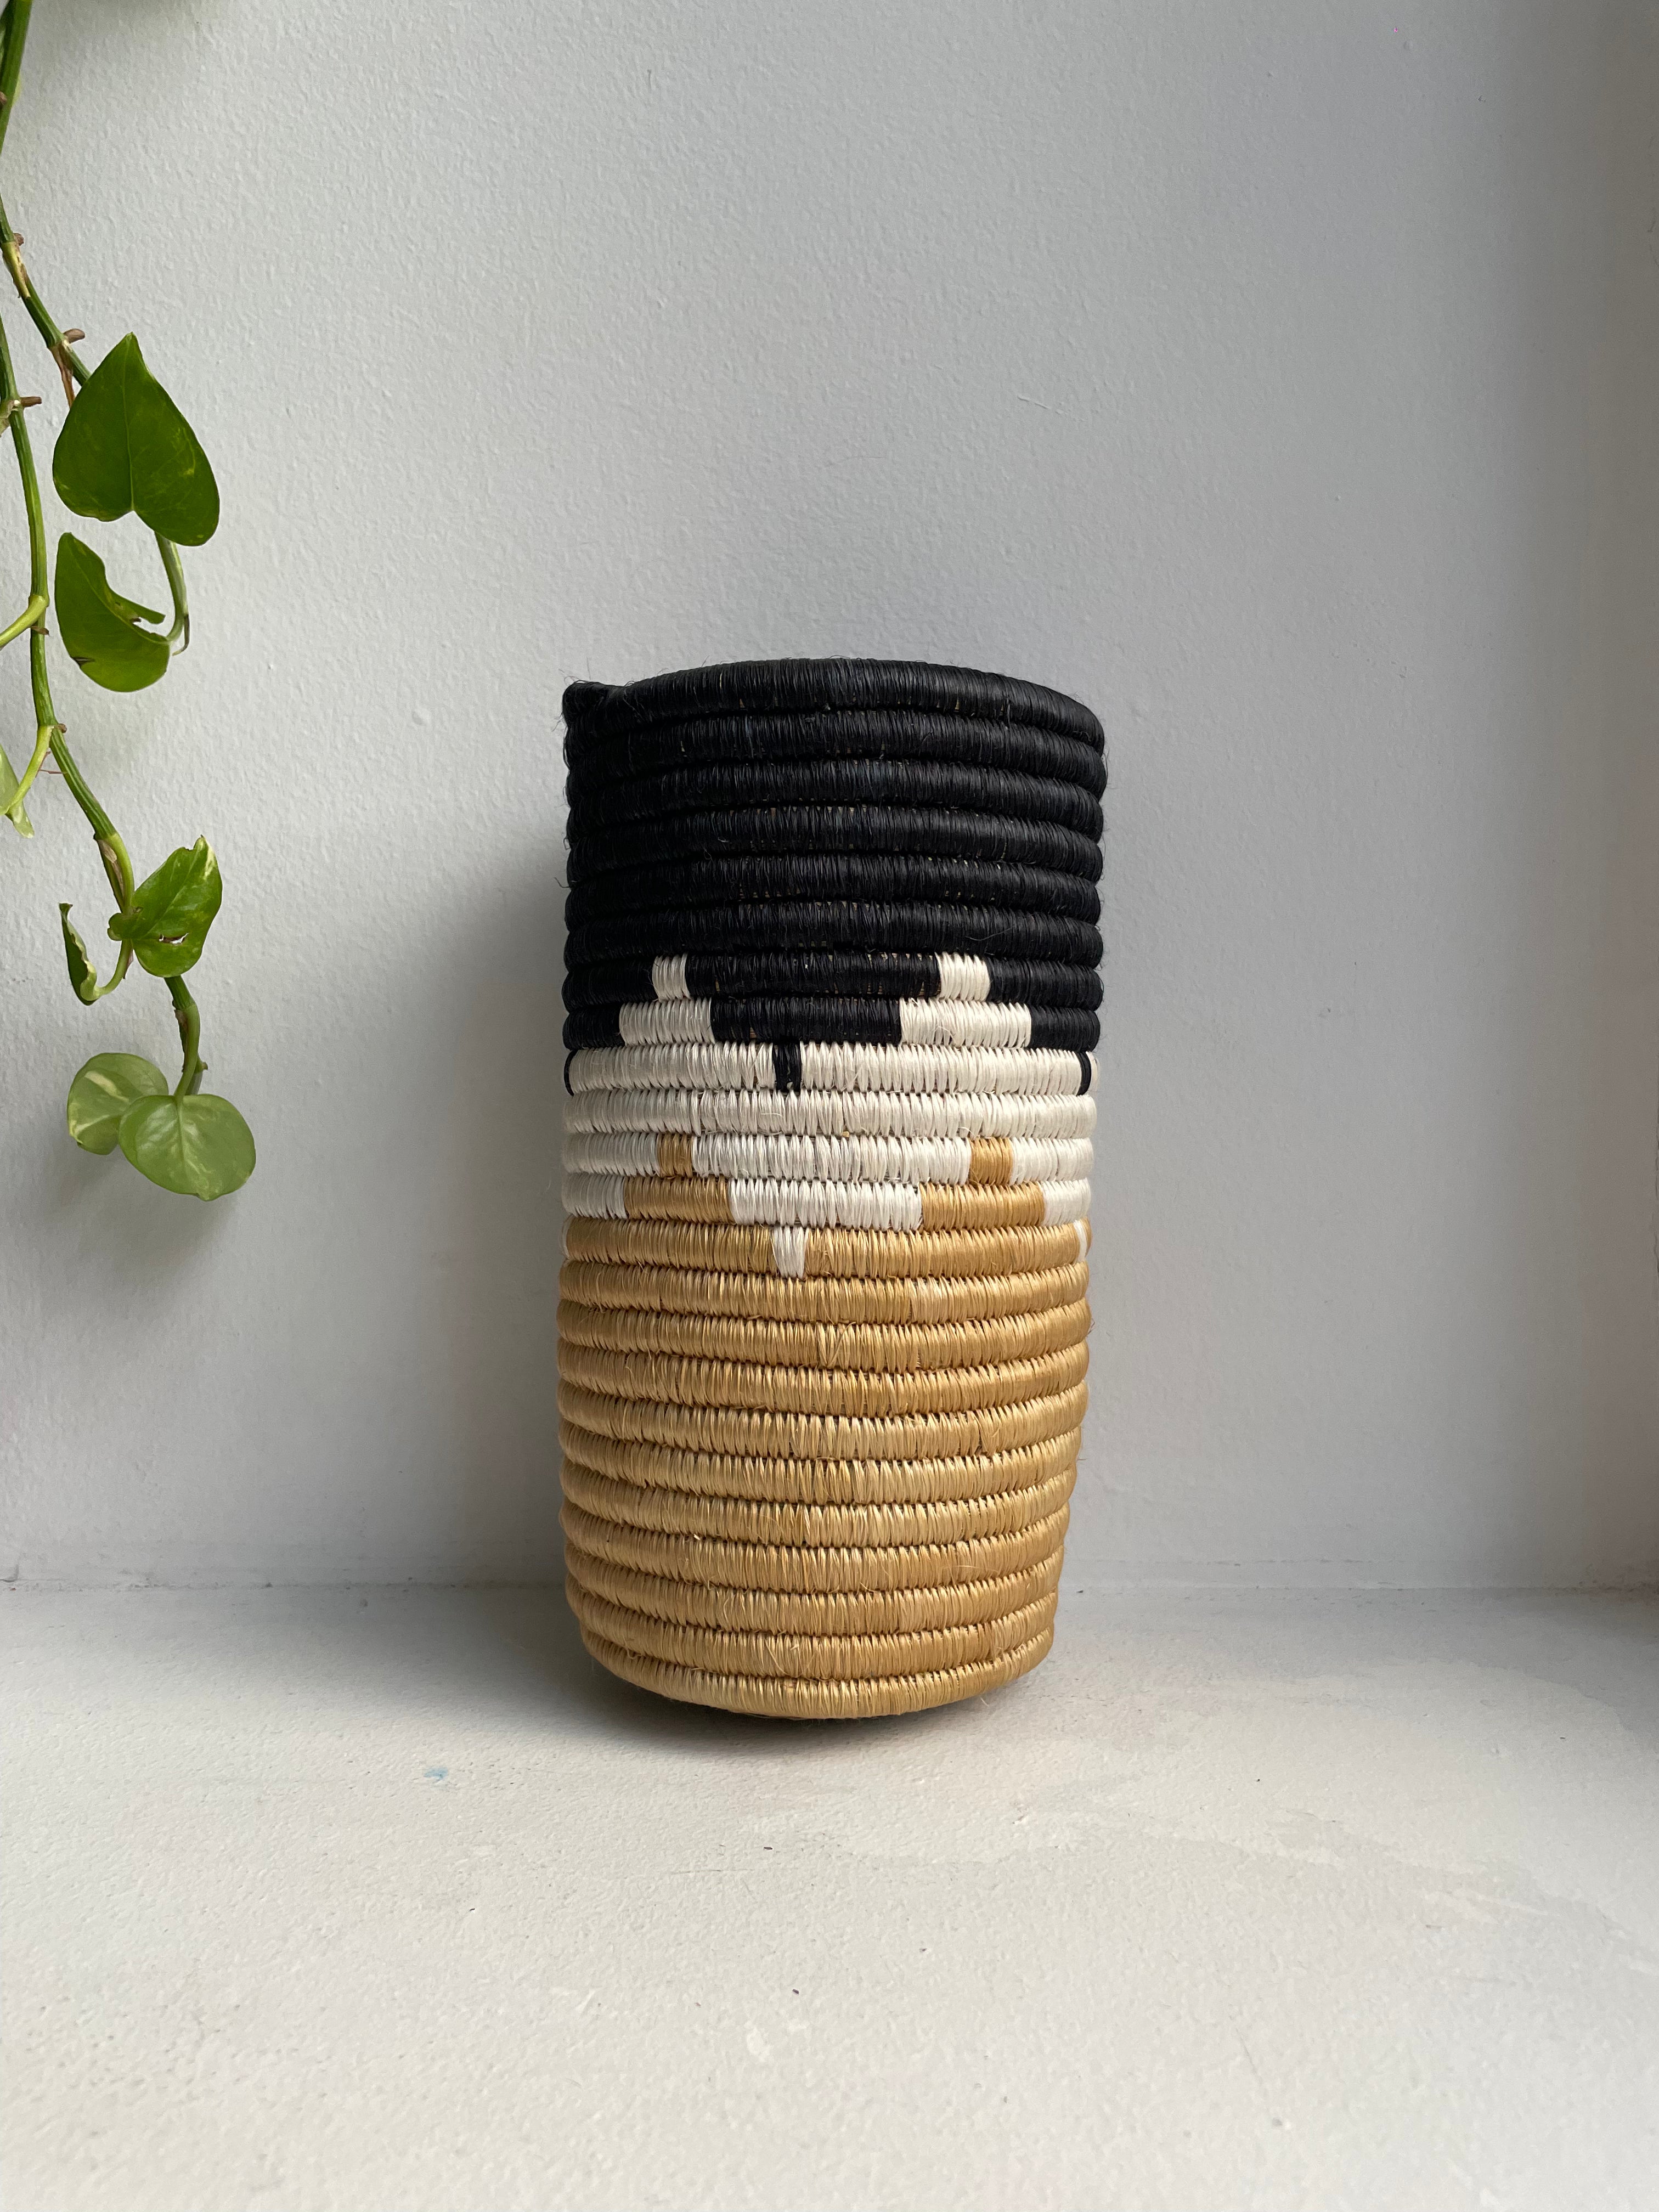 Display of black, white and beige colored vase